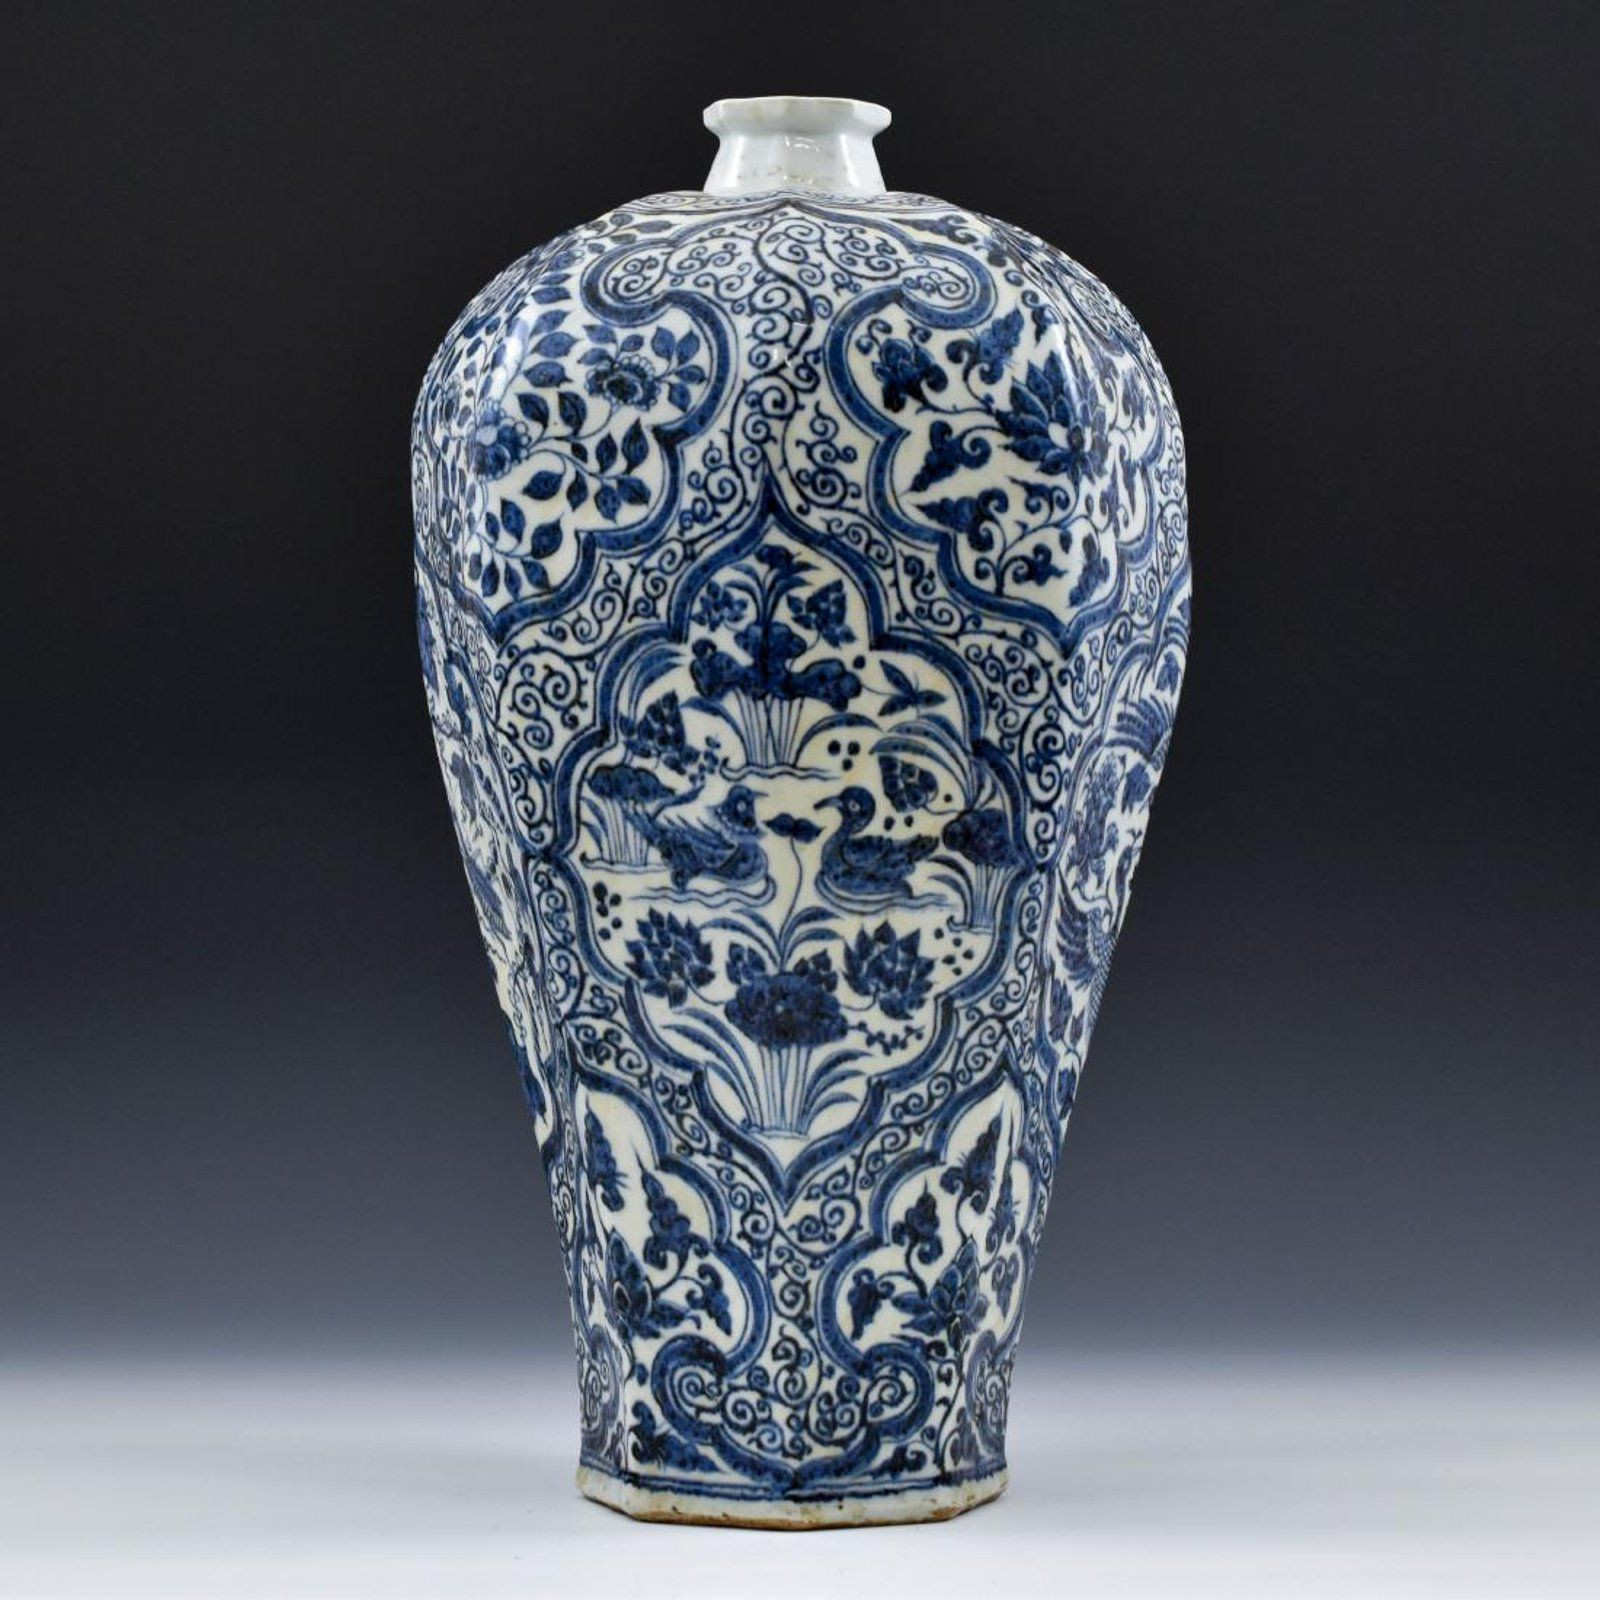 21 Lovable Blue and White Jars and Vases 2023 free download blue and white jars and vases of blue and white ceramic vase pics blue white vase blue and white with regard to blue and white ceramic vase pics ming dynasty blue and white octagonal meiping